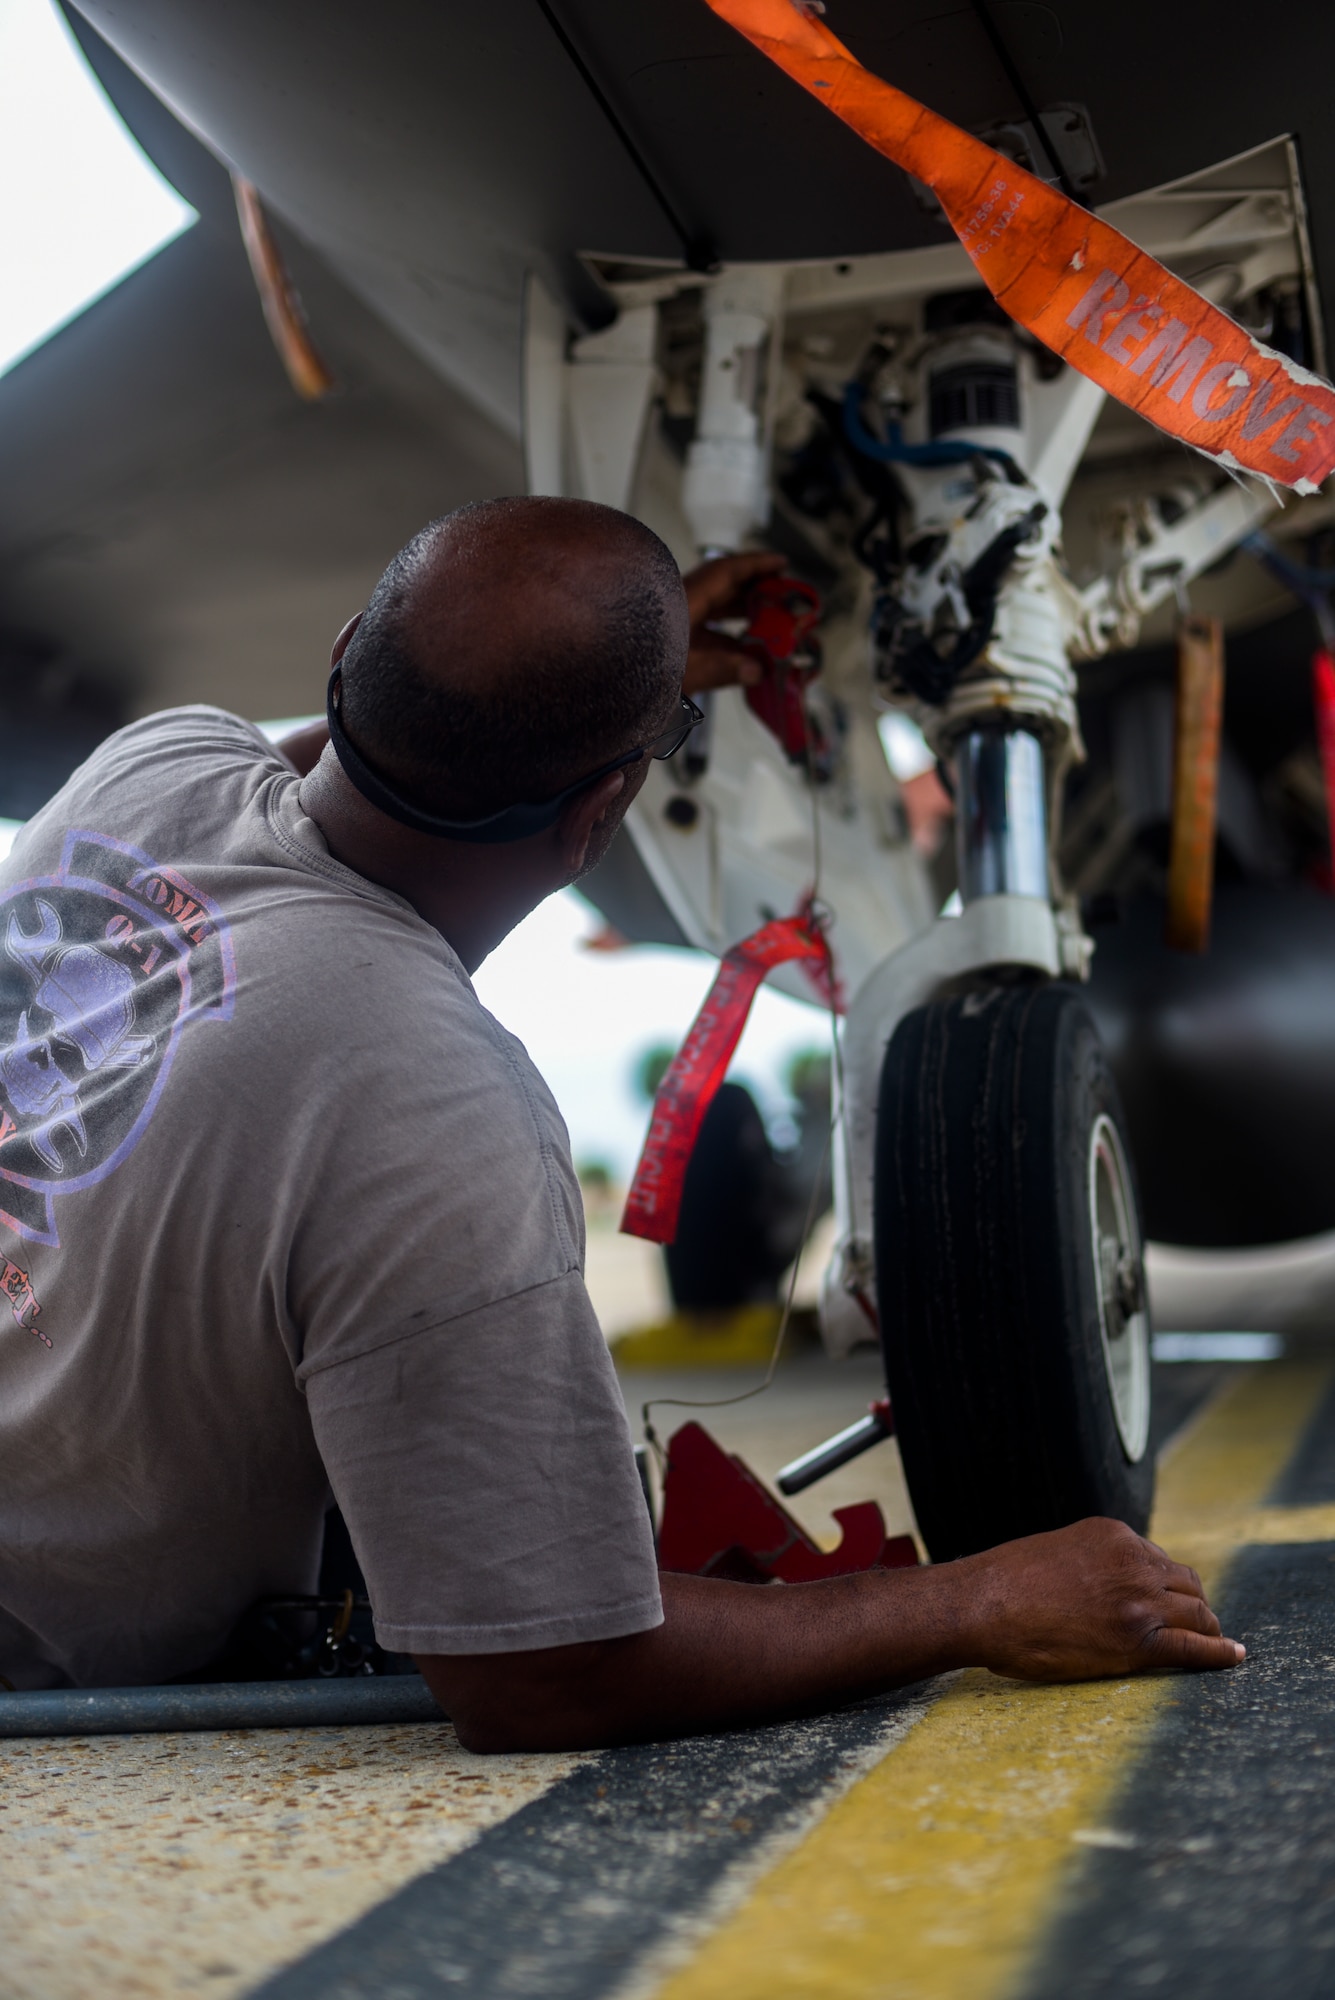 Dan Jones with the 82nd Aerial Targets Squadron, contractor, performs maintenance to the front gear of a QF-16 at Tyndall Air Force Base, Florida, July 9, 2020. Operations and performance checks are completed before and after every aircraft take off. (U.S. Air Force Staff Sgt. Magen M. Reeves)